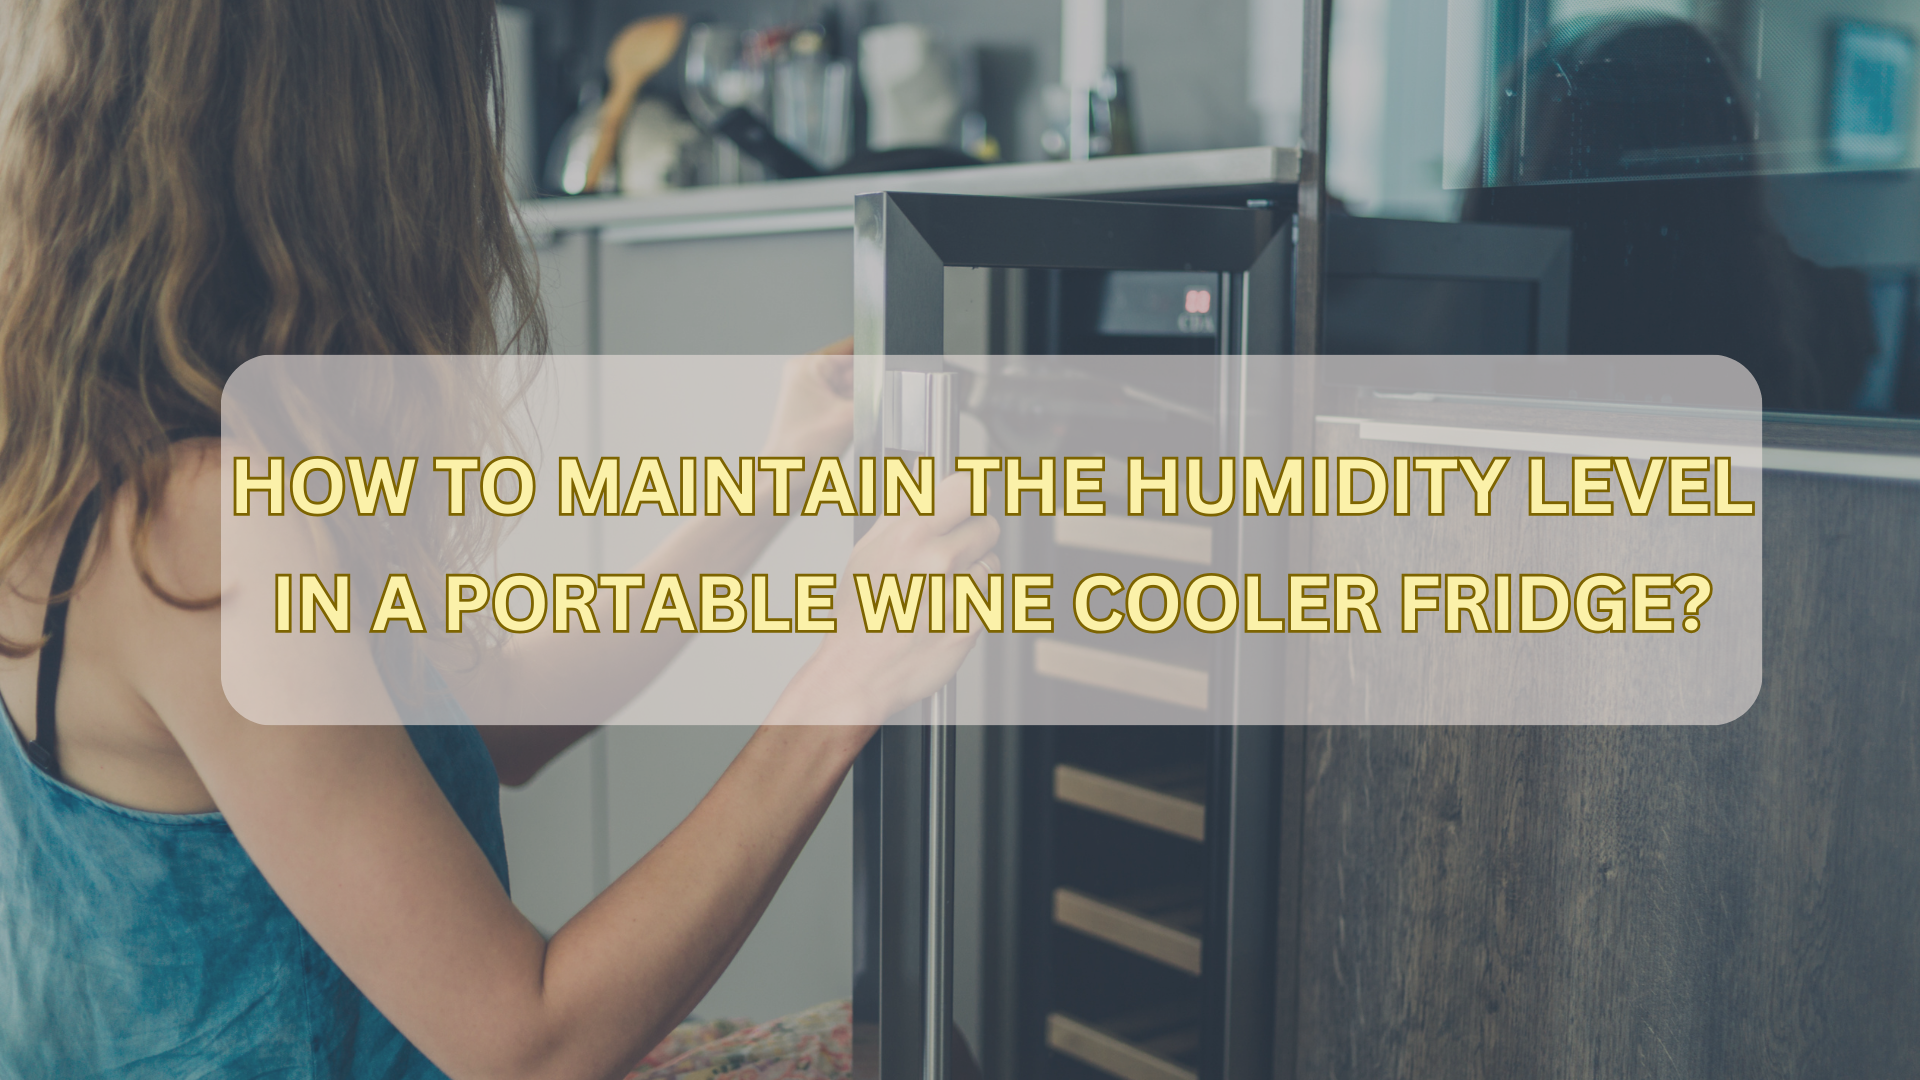 How to maintain the humidity level in a portable wine cooler fridge